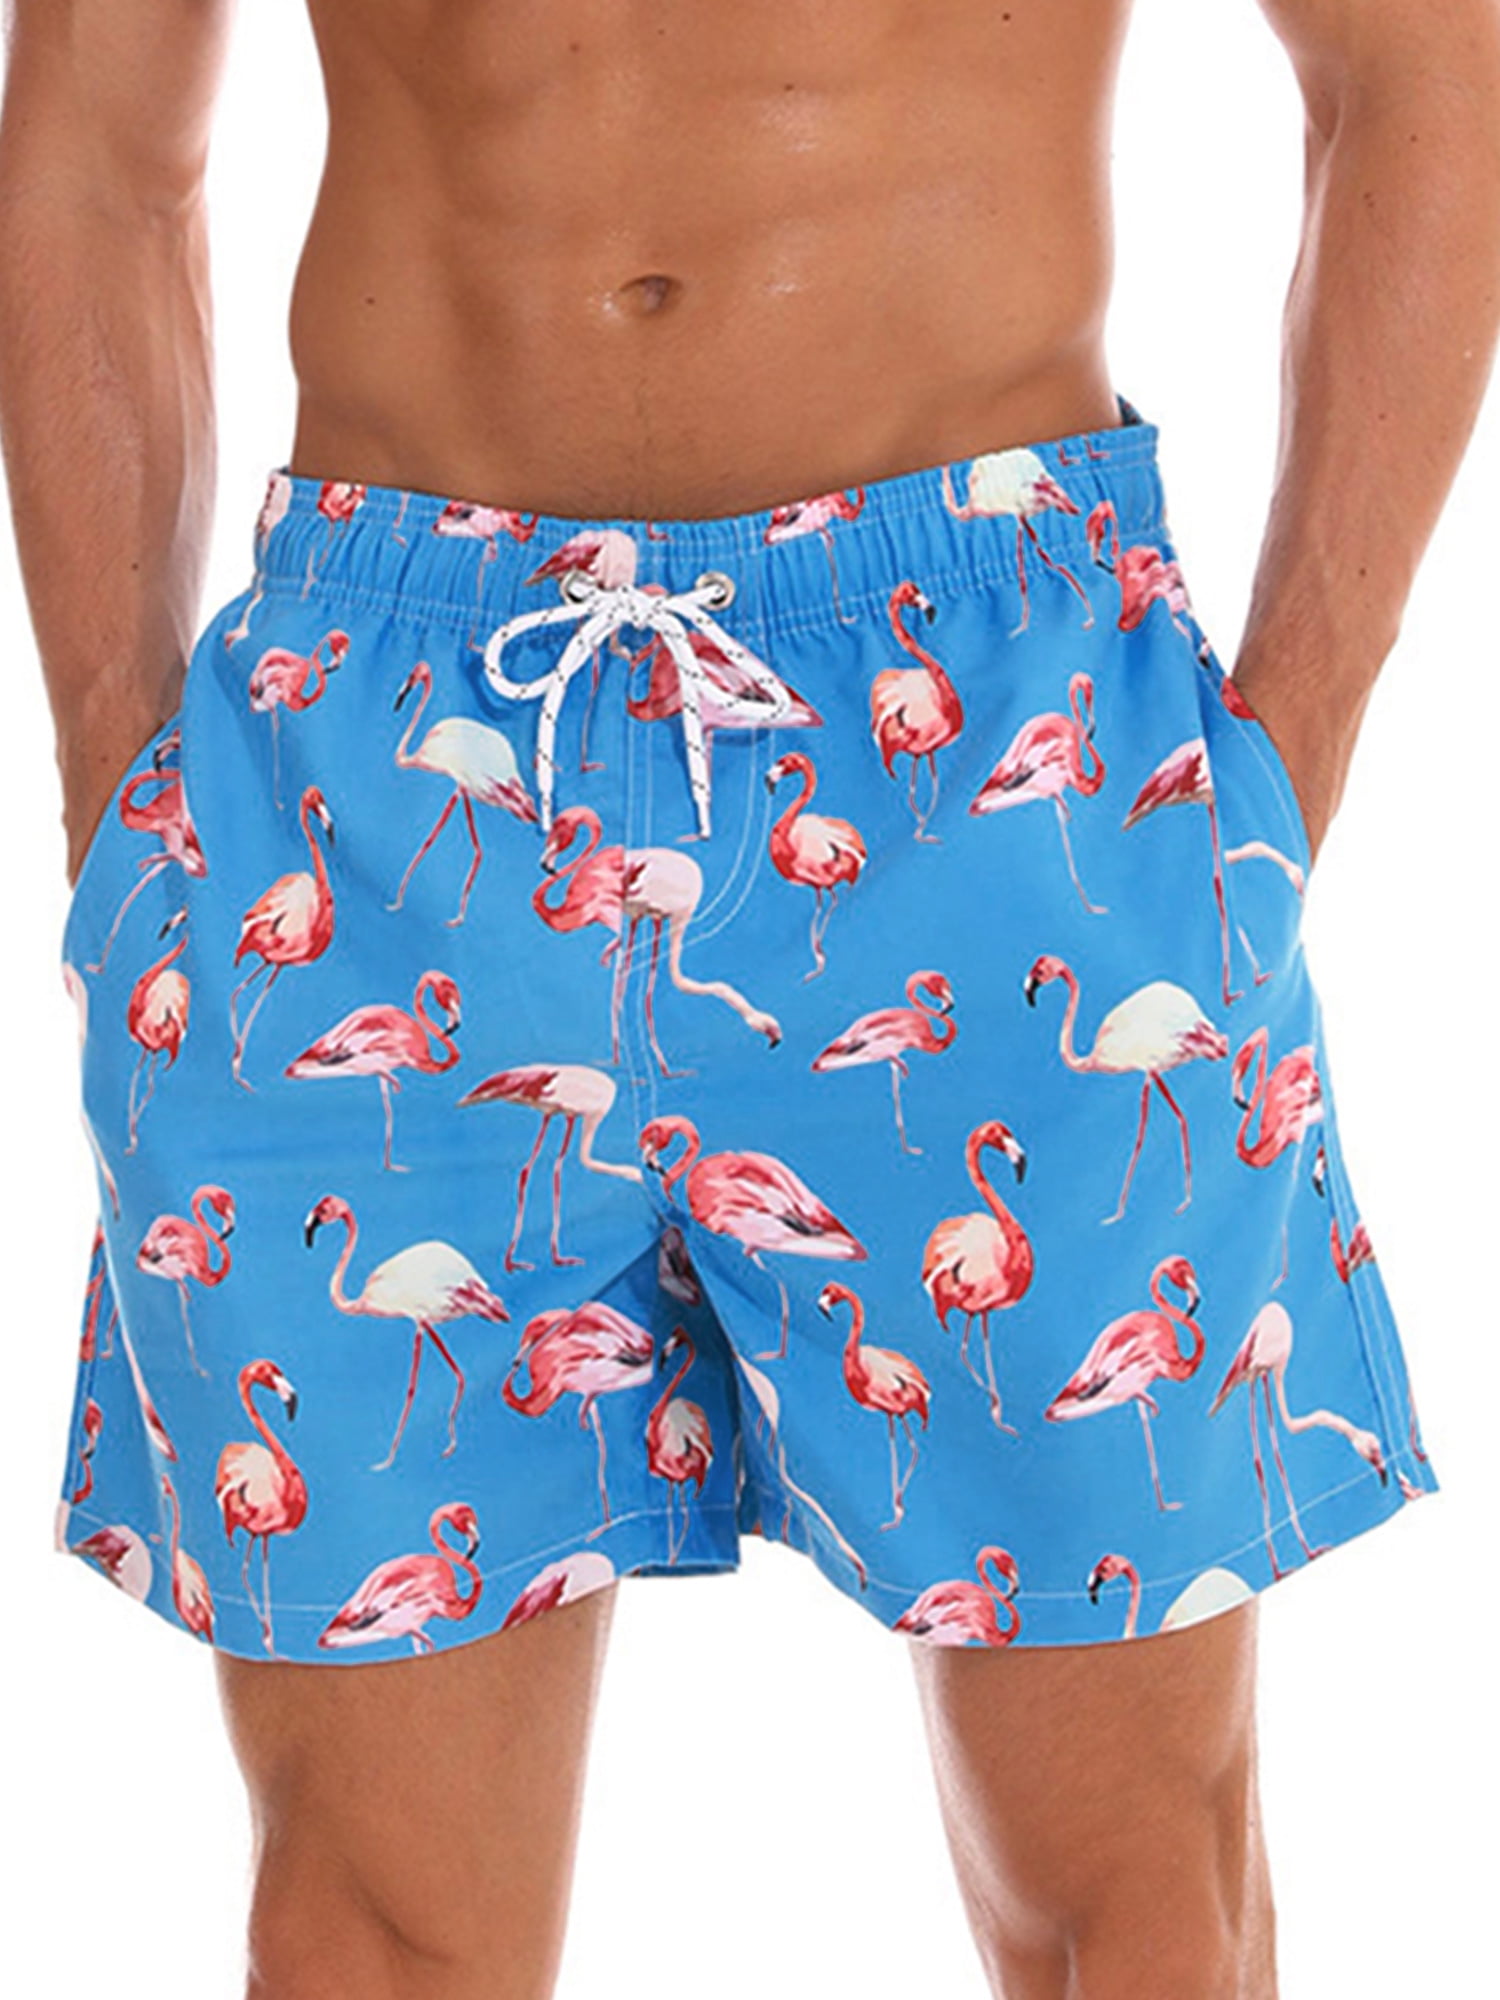 Mens Swim Trunks Pretty Daisy Floral Print Printed Beach Board Shorts with Pockets Cool Novelty Bathing Suits for Teen Boys